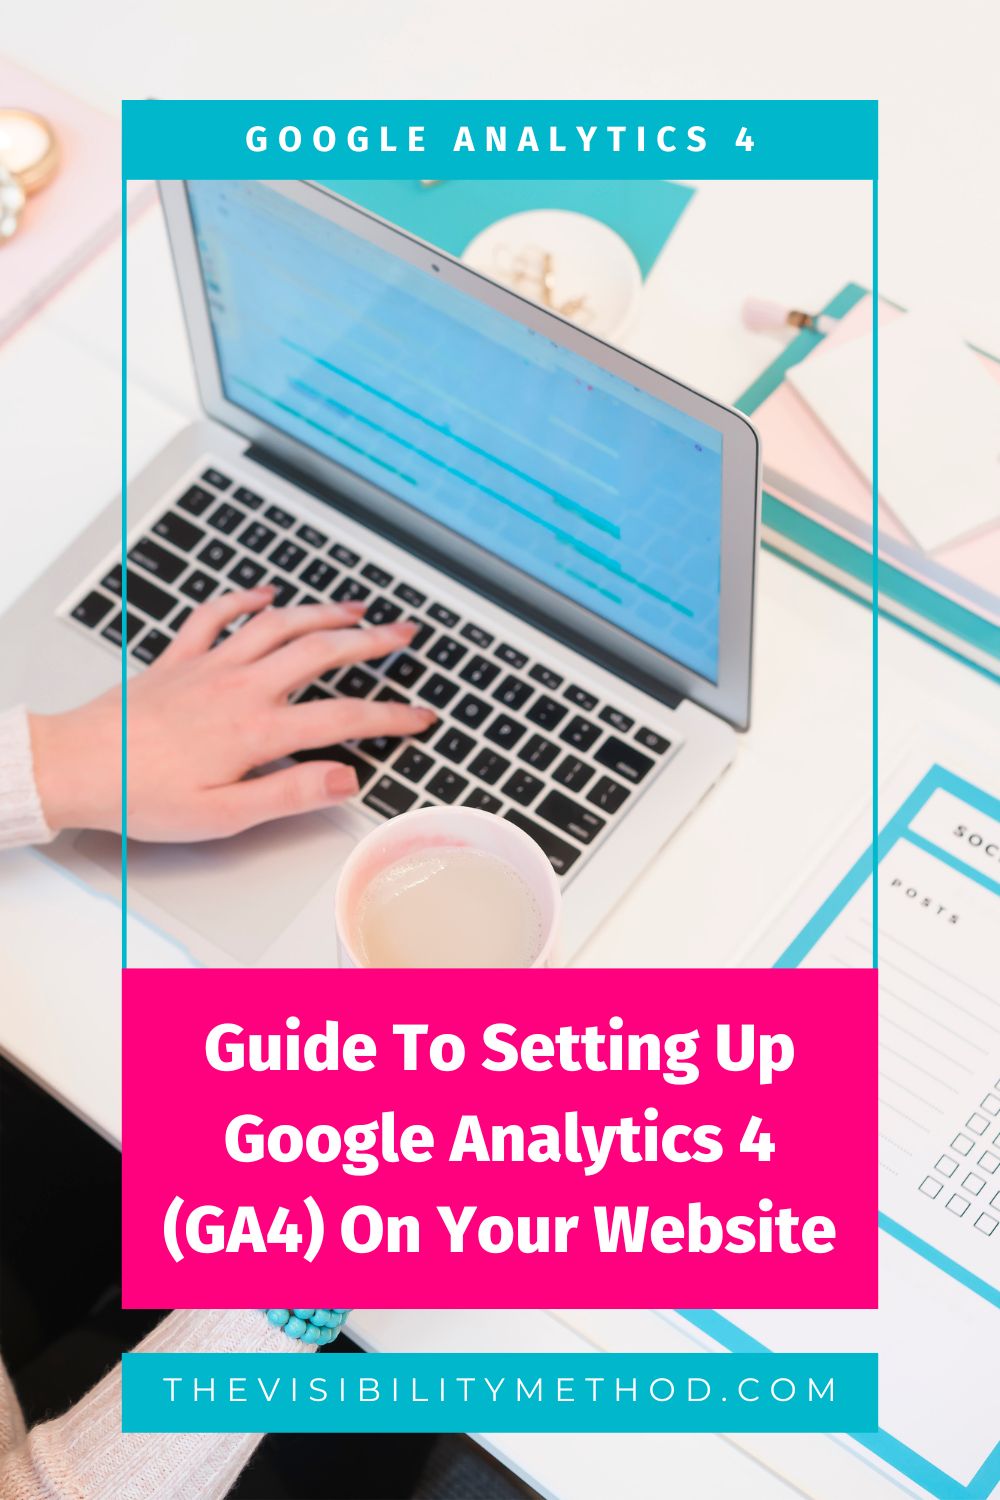 Guide To Setting Up Google Analytics 4 (GA4) On Your Website